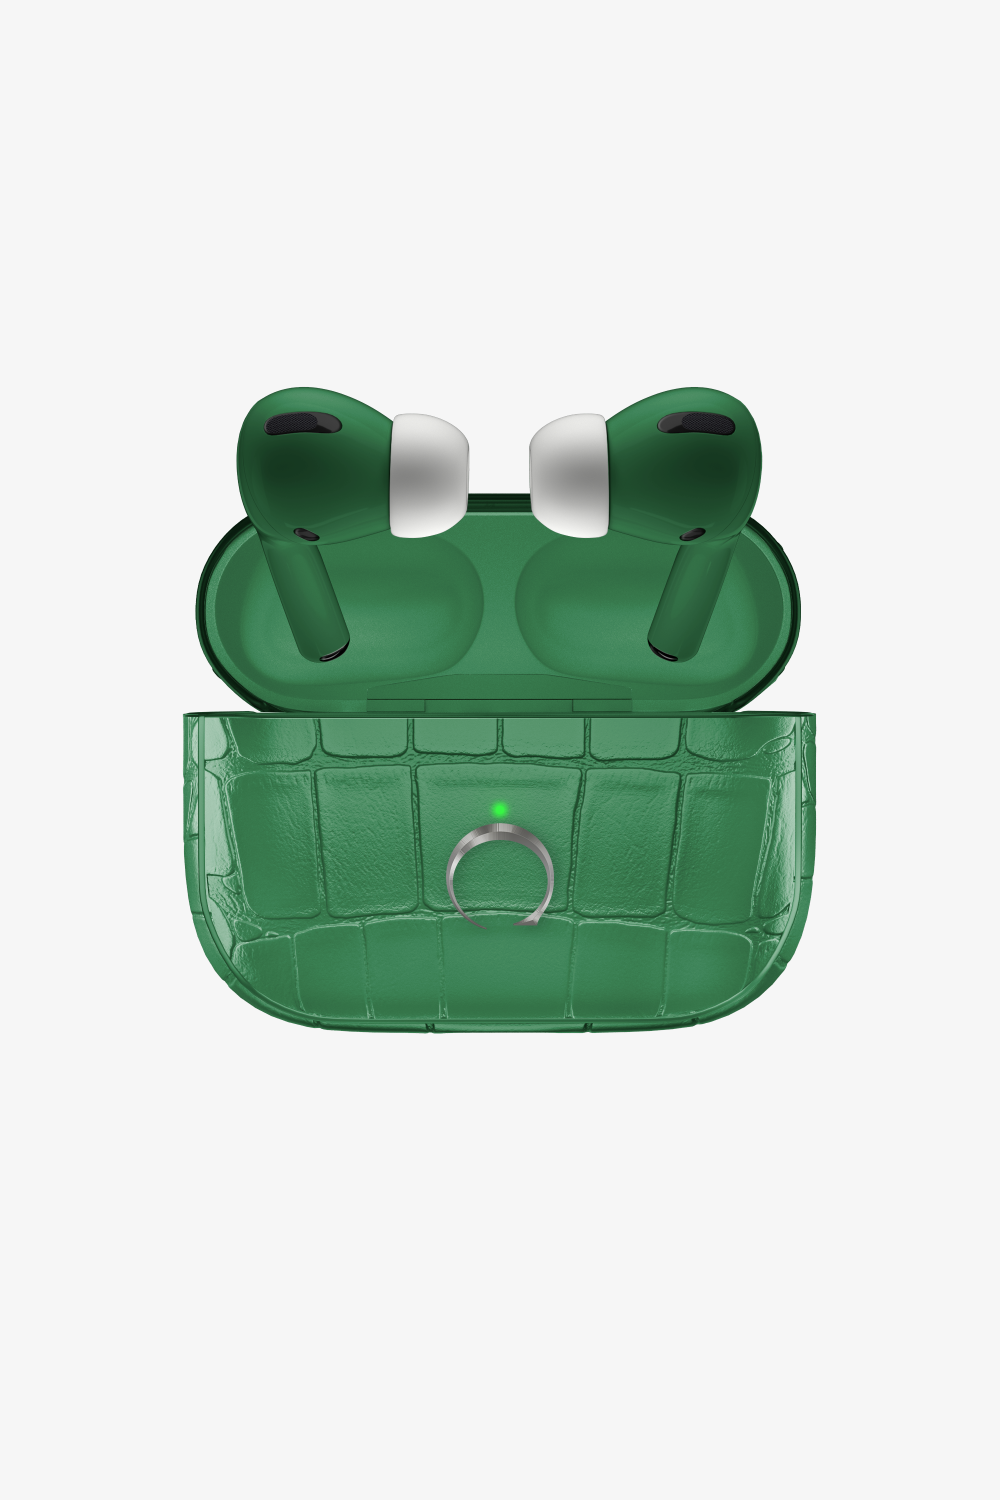 Alligator Airpods Pro 2nd Generation - Stainless Steel / Green Emerald - zollofrance